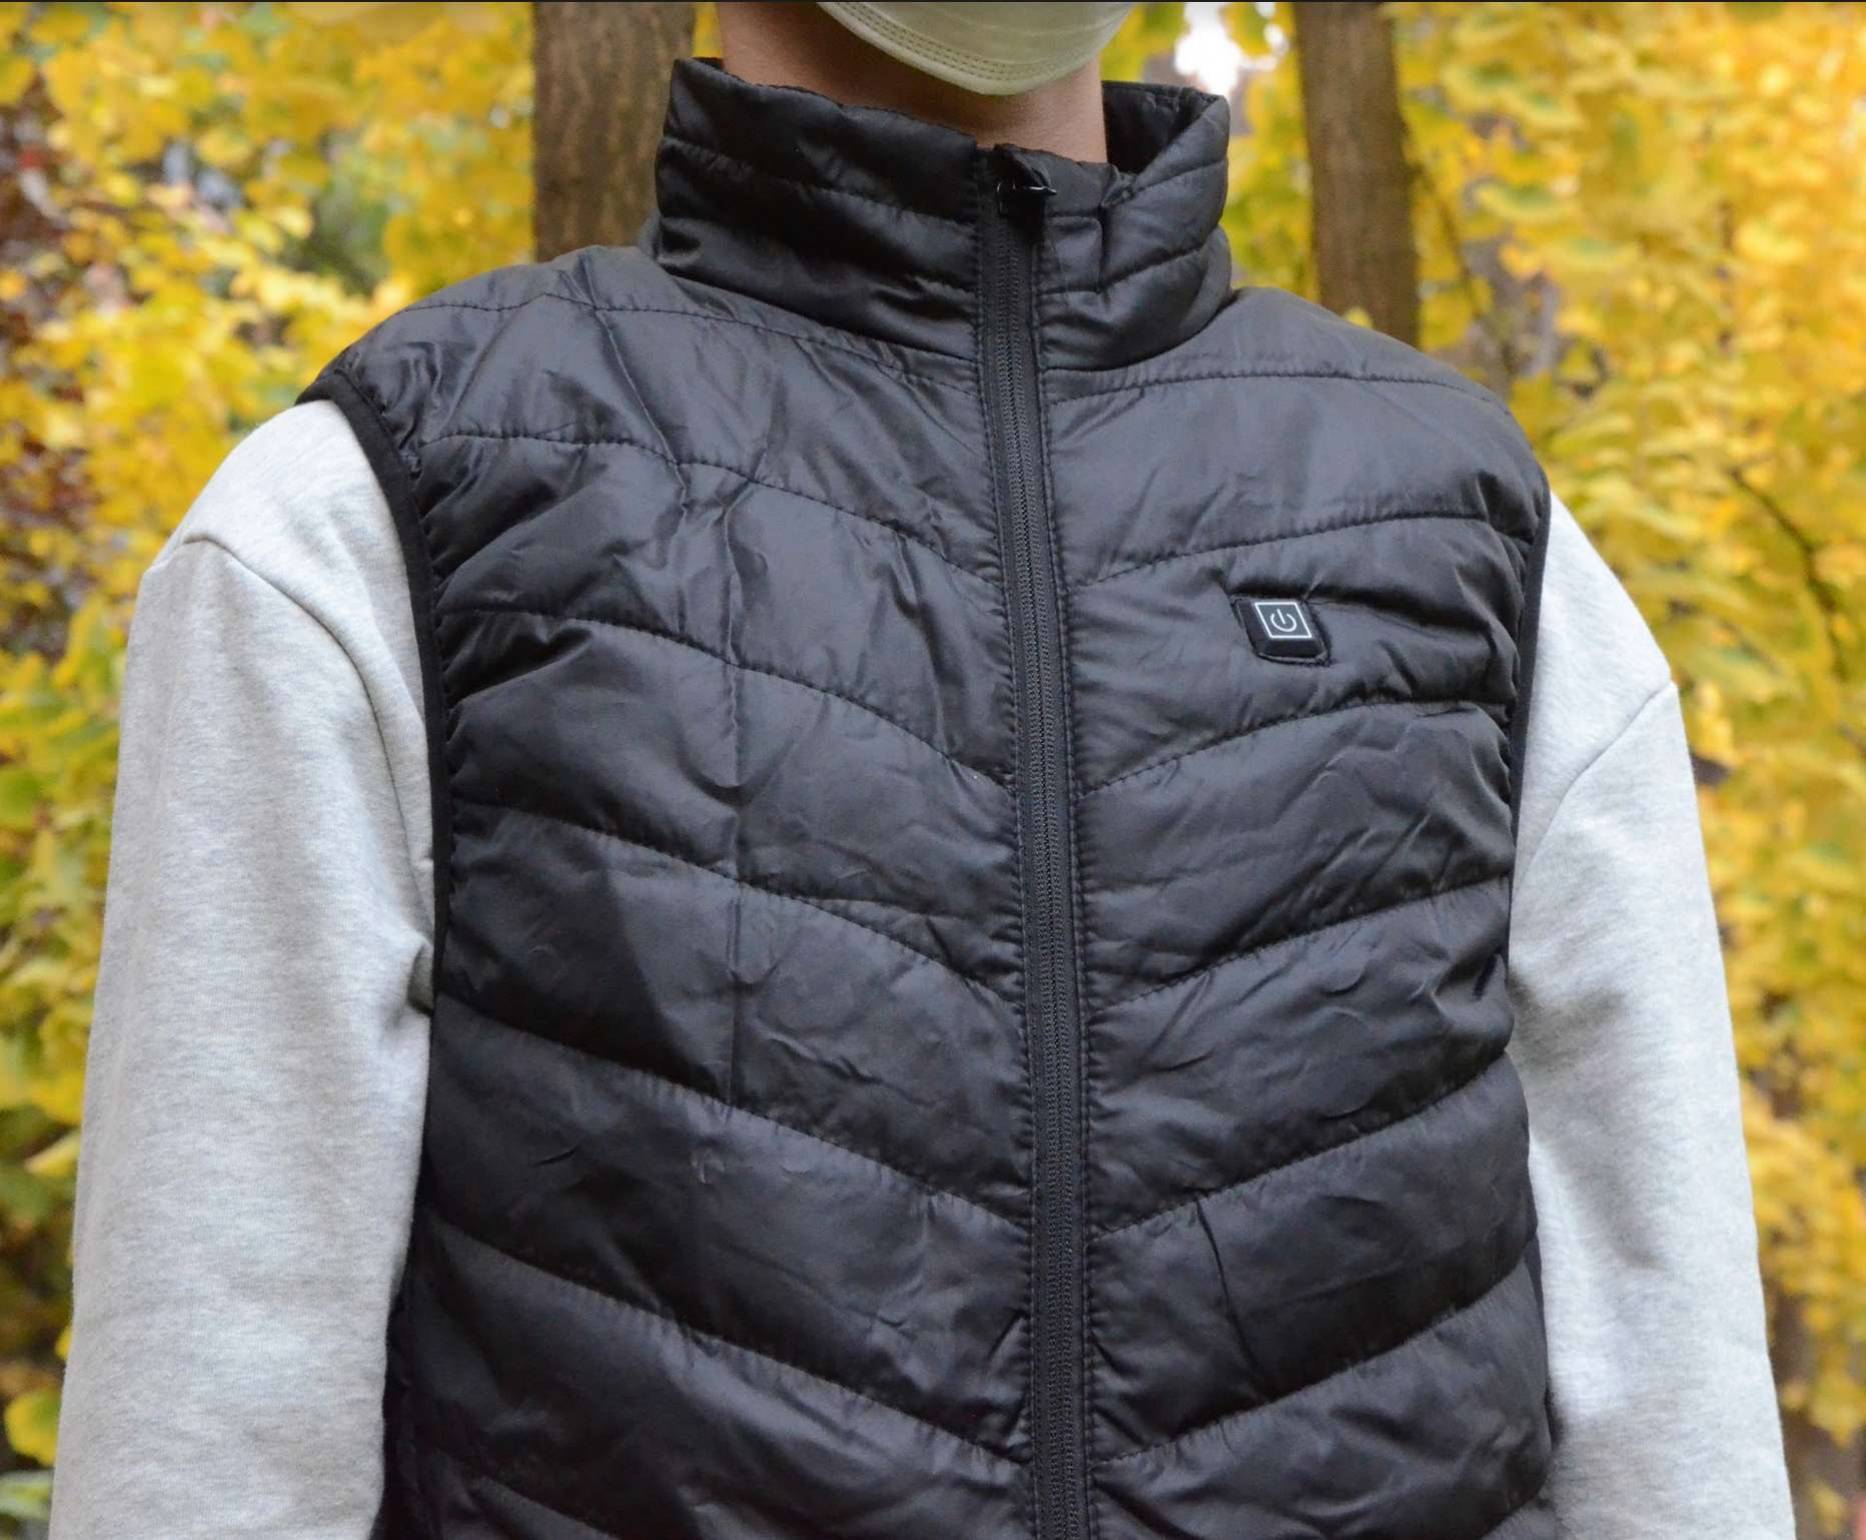 Heated Jacket For Indoors